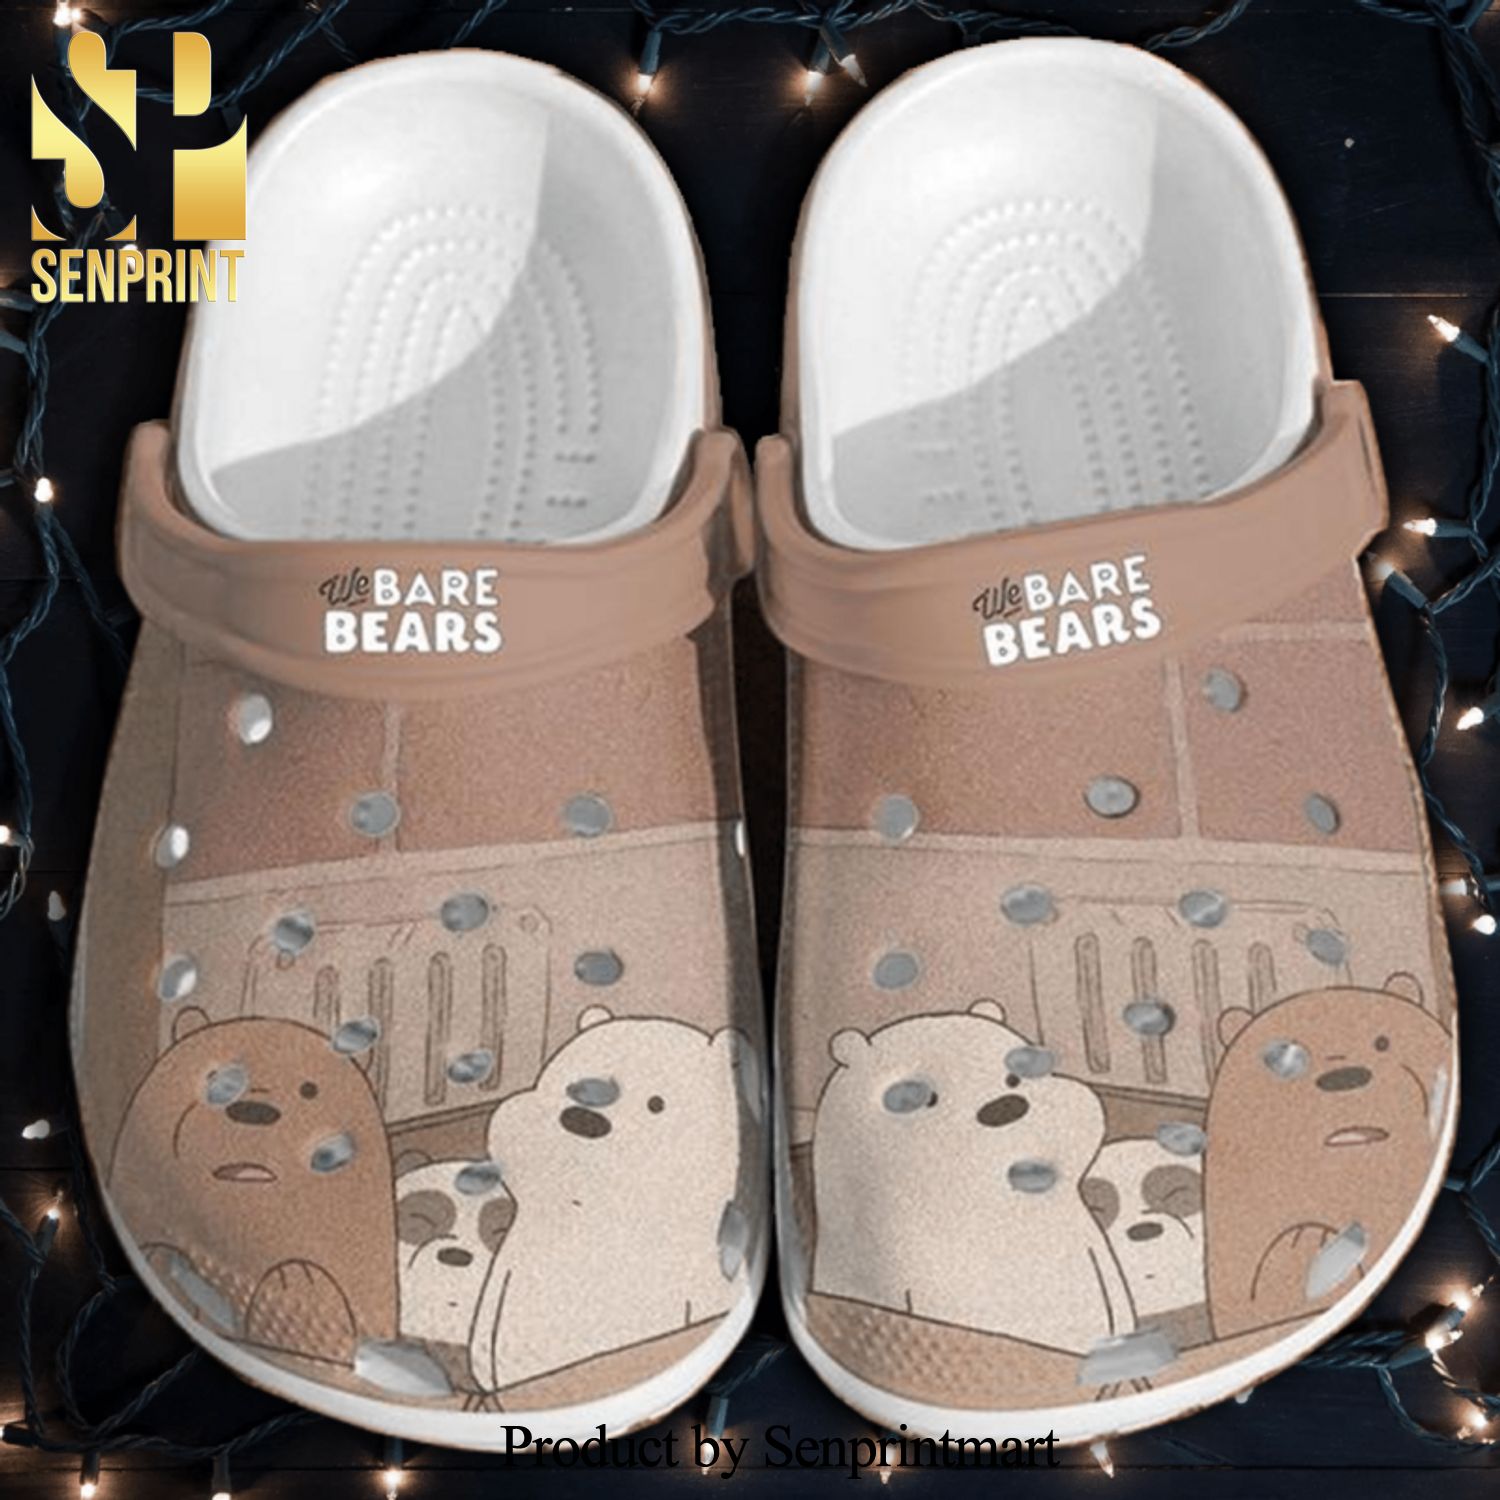 We Bare Bears All Over Printed Crocs Sandals